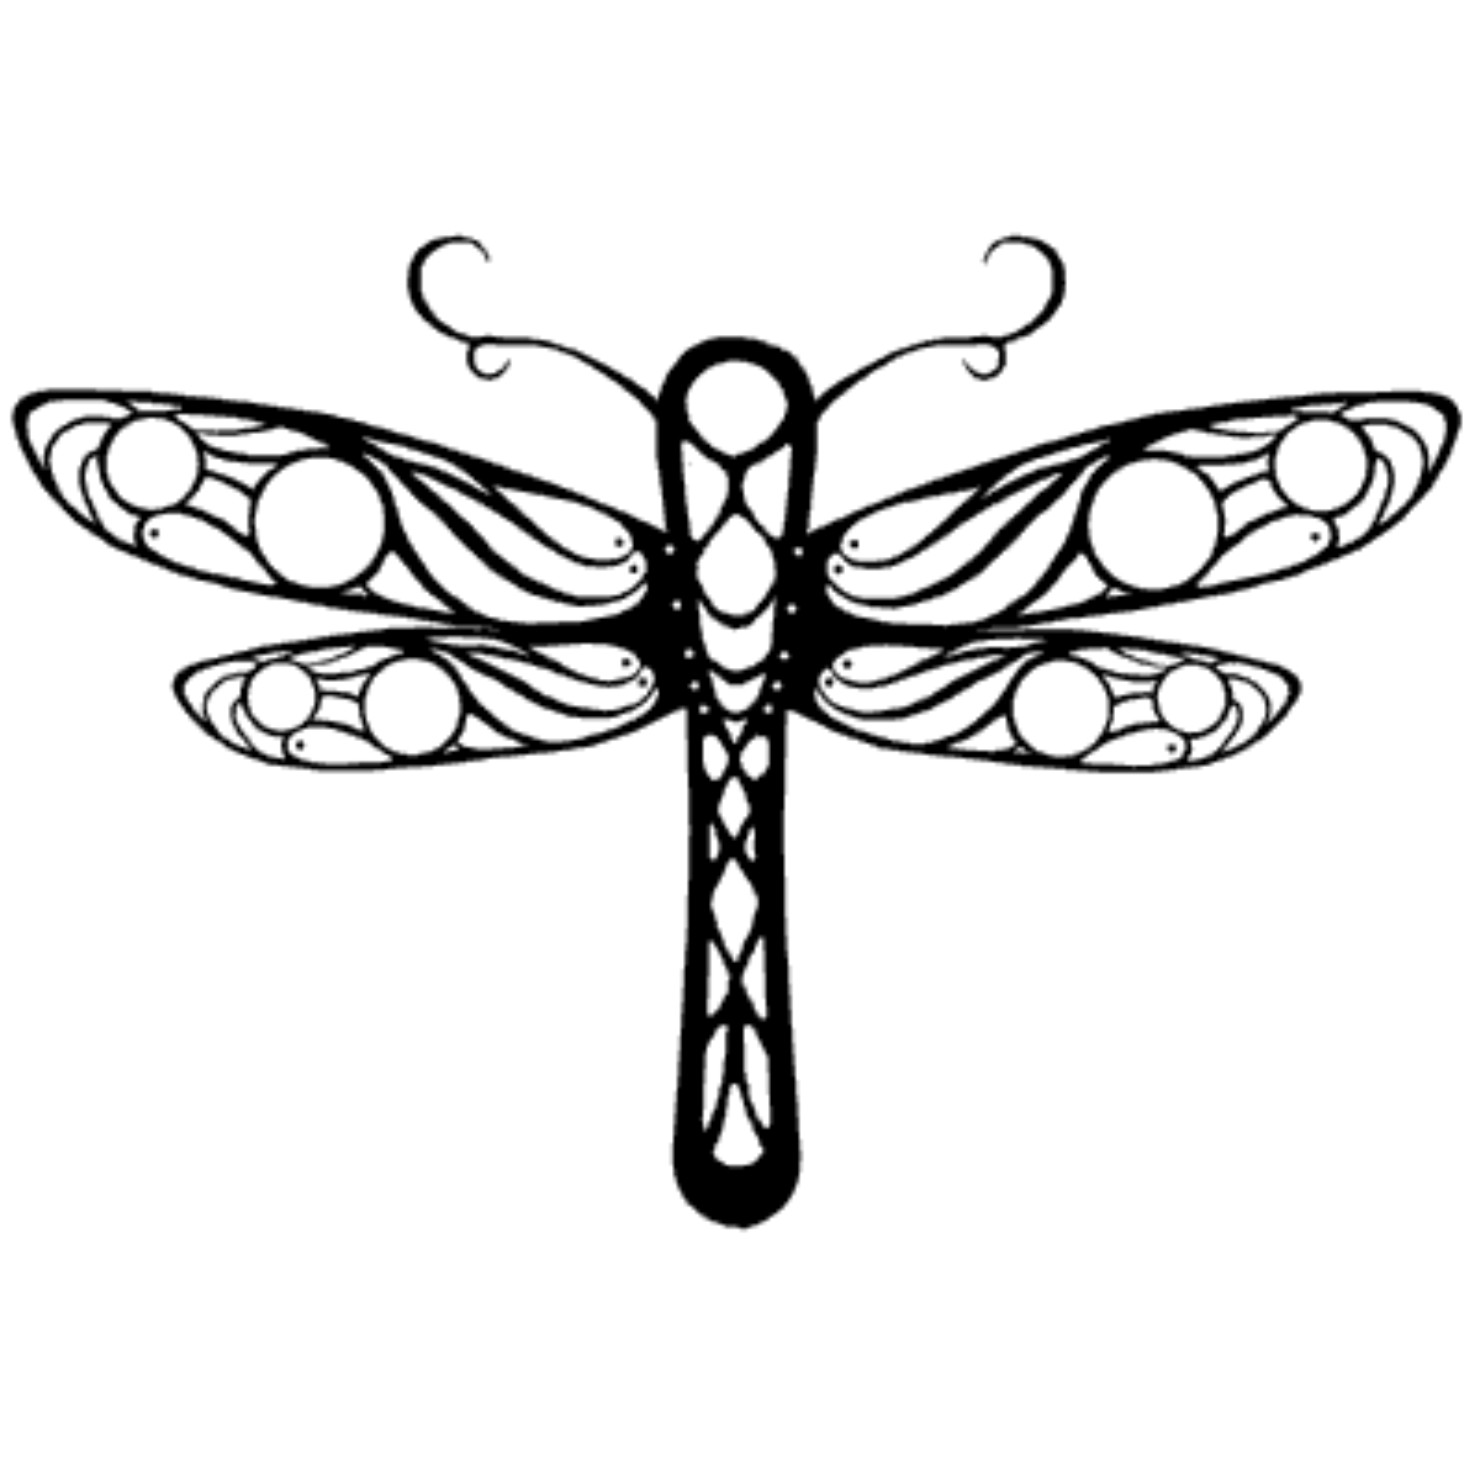 Dragonfly Drawings Designs